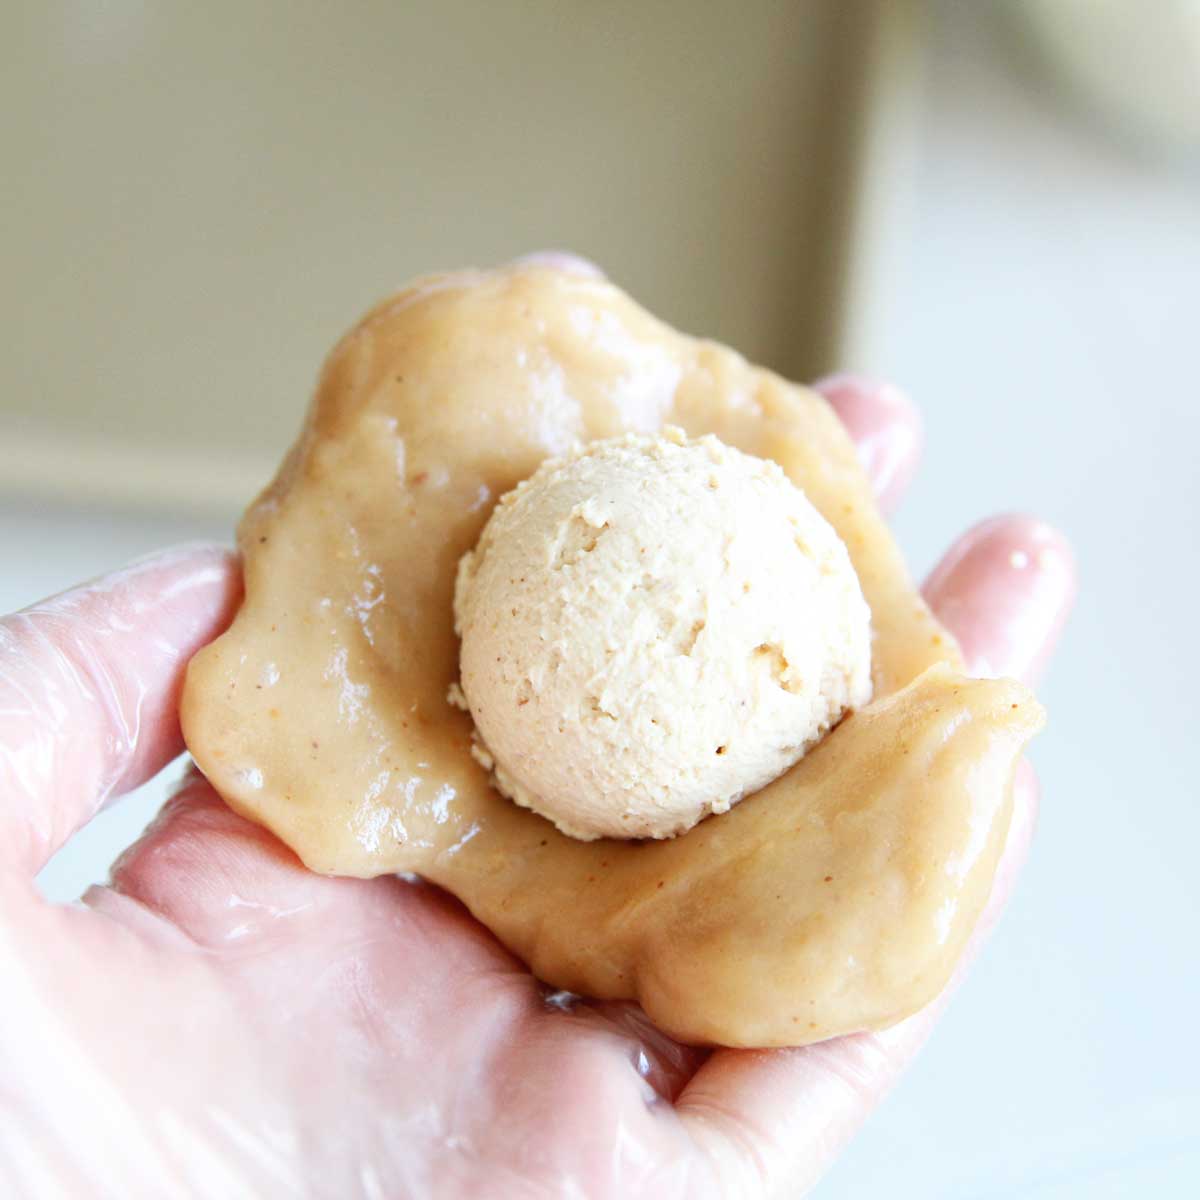 Low Calorie Pb Fit Mochi made with Peanut Butter Powder - Low Calorie Pb Fit Mochi